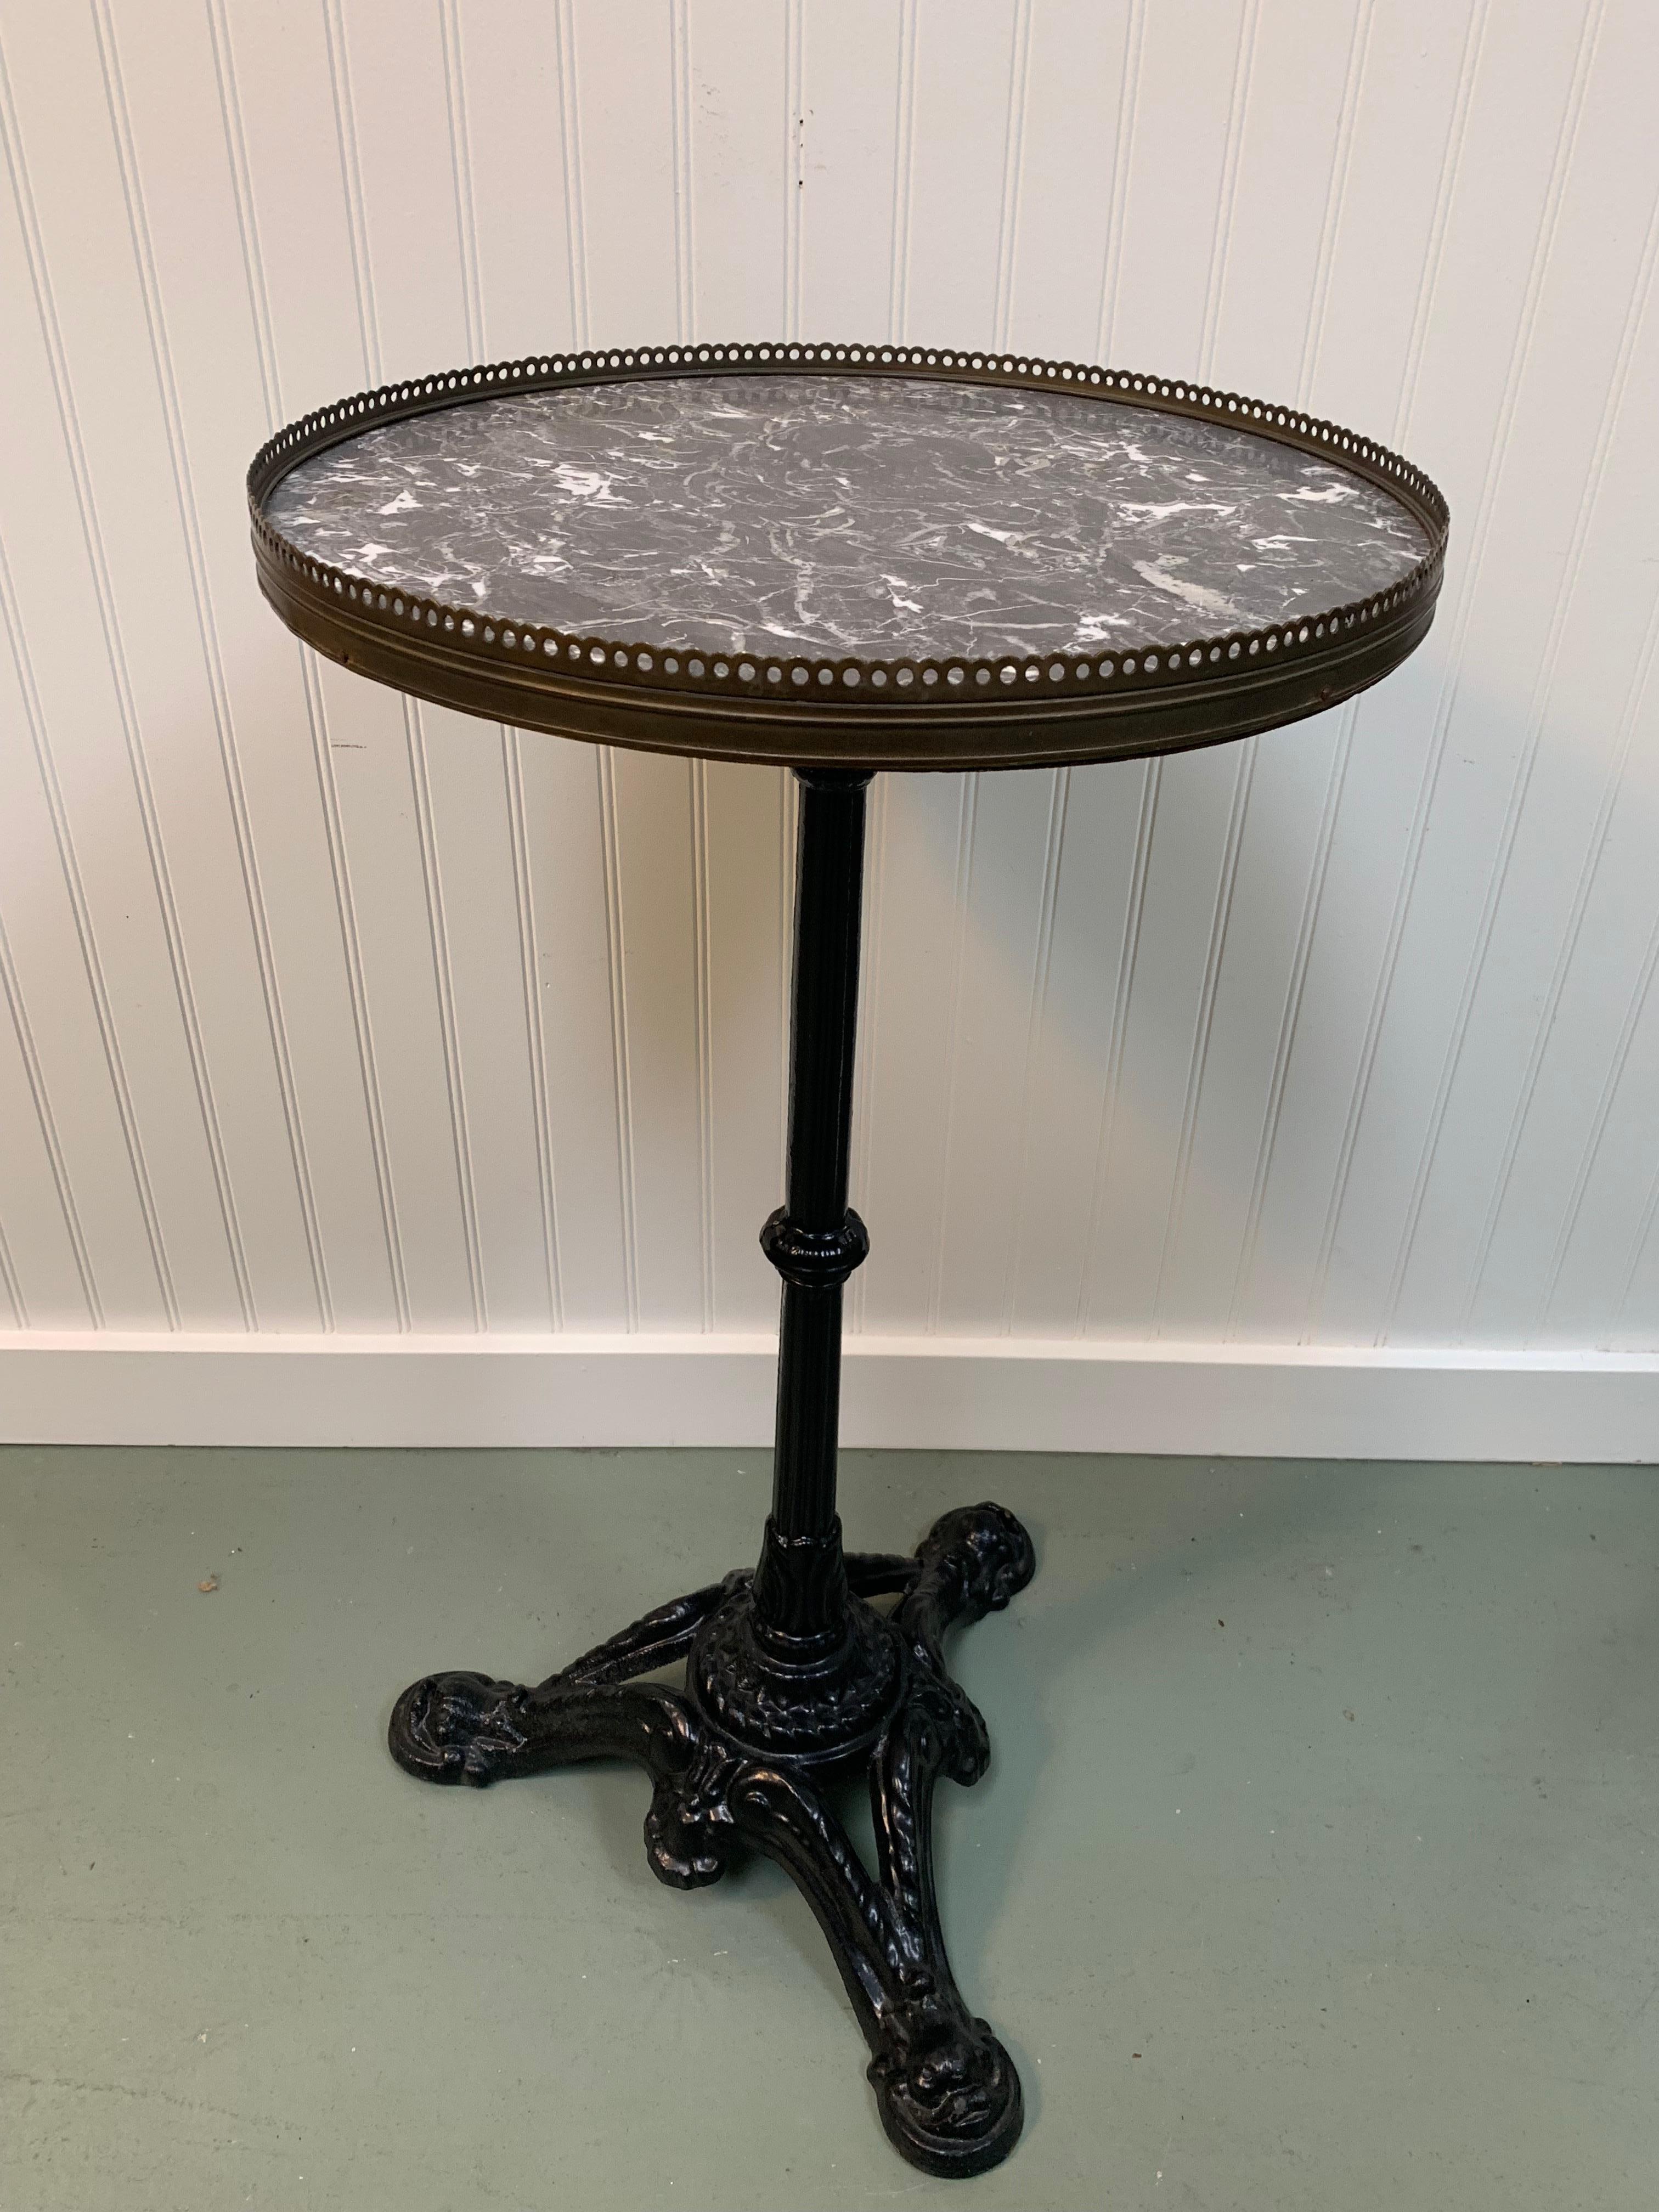 Early 20th century French cafe bistro table with cast iron pedestal. Original marble top with brass fencing around, in great condition. This piece would be ideal in a breakfast nook or as an outdoor garden table.
Diameter: 16.25